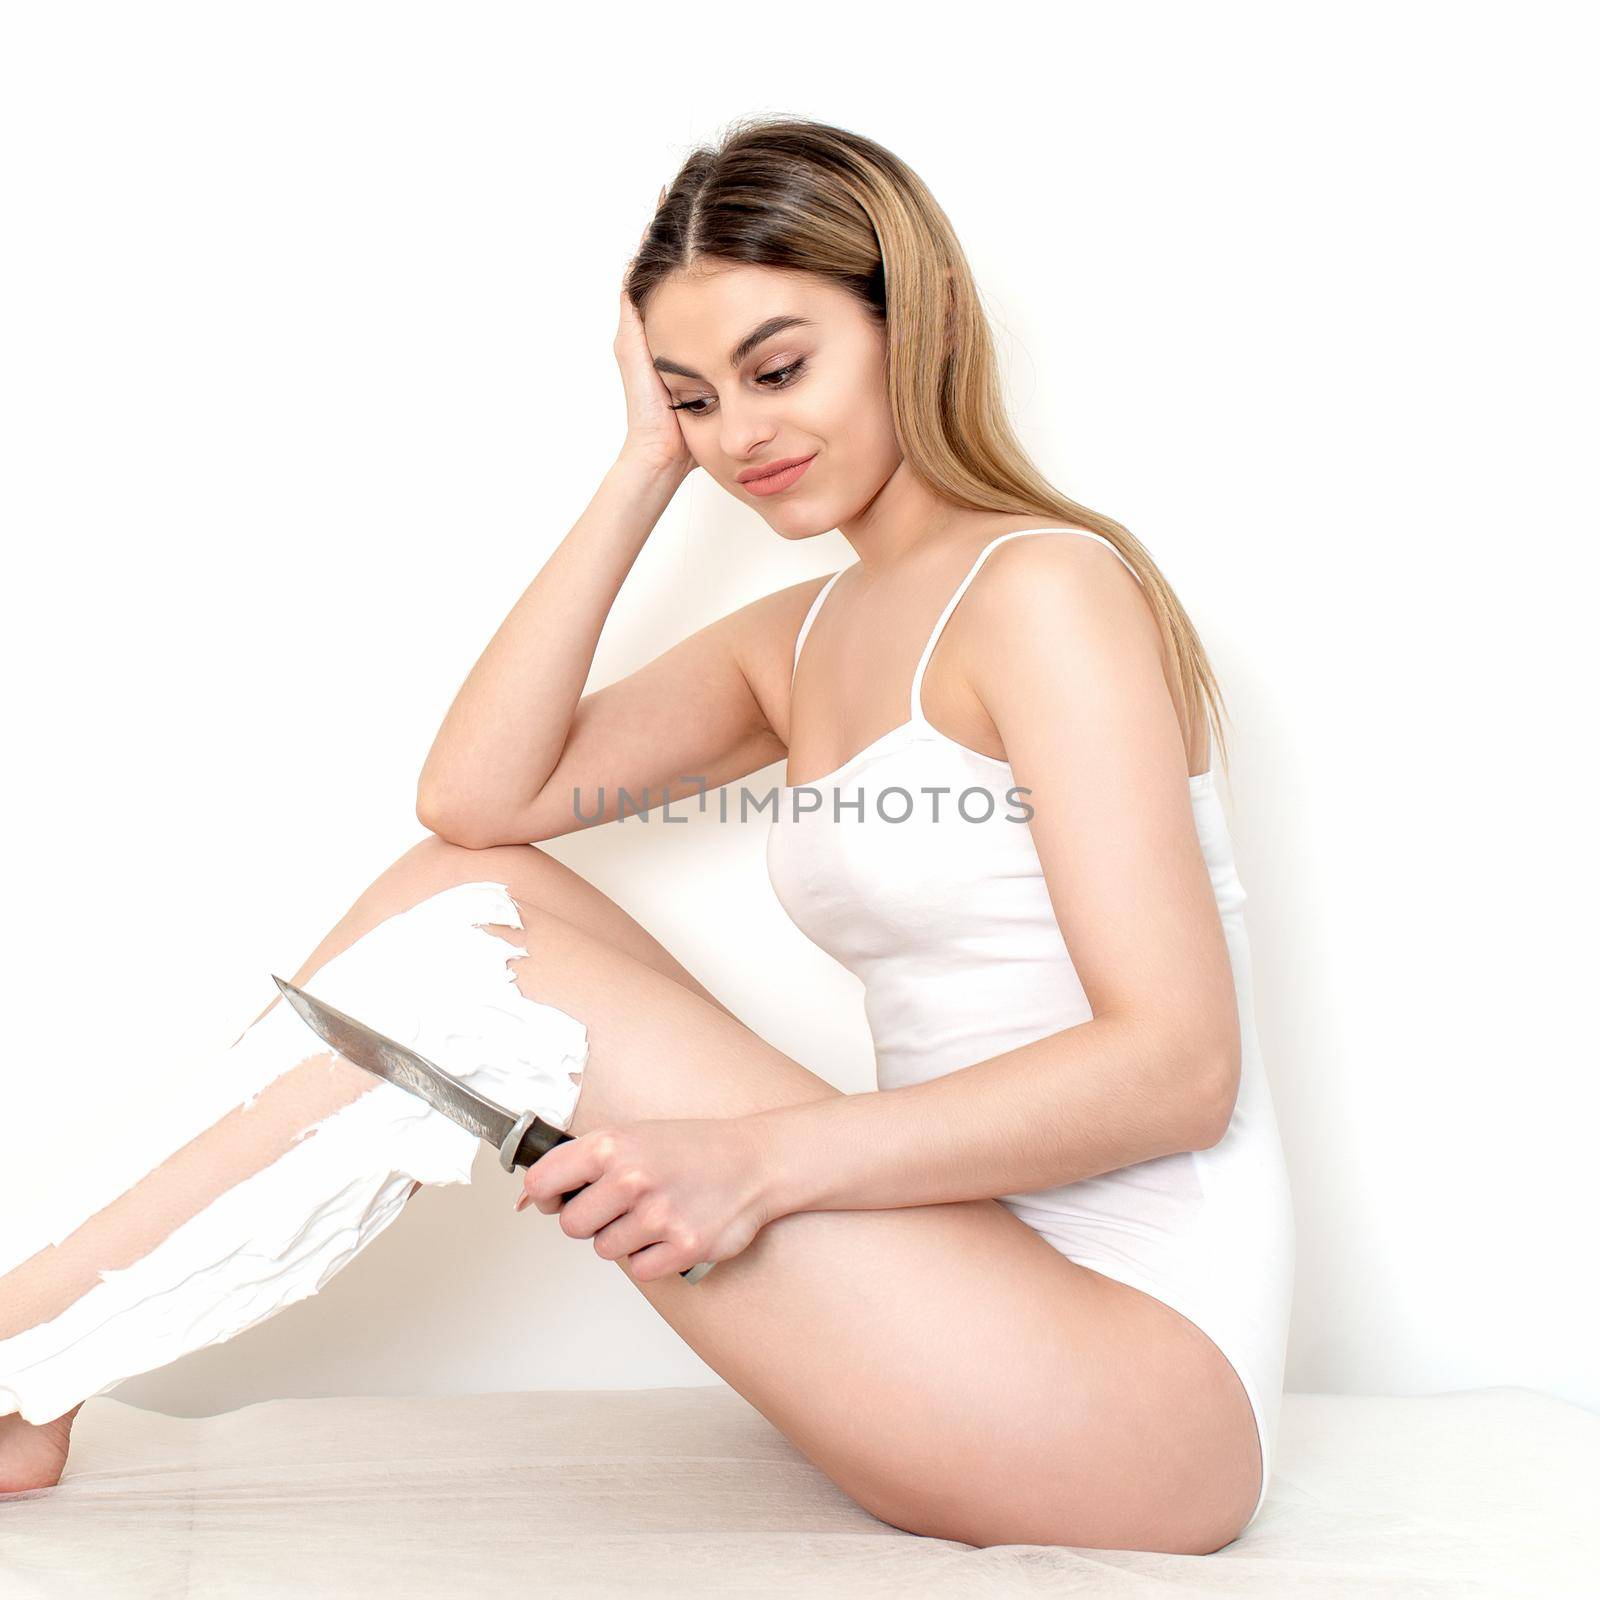 Woman shaves her legs with a knife by okskukuruza